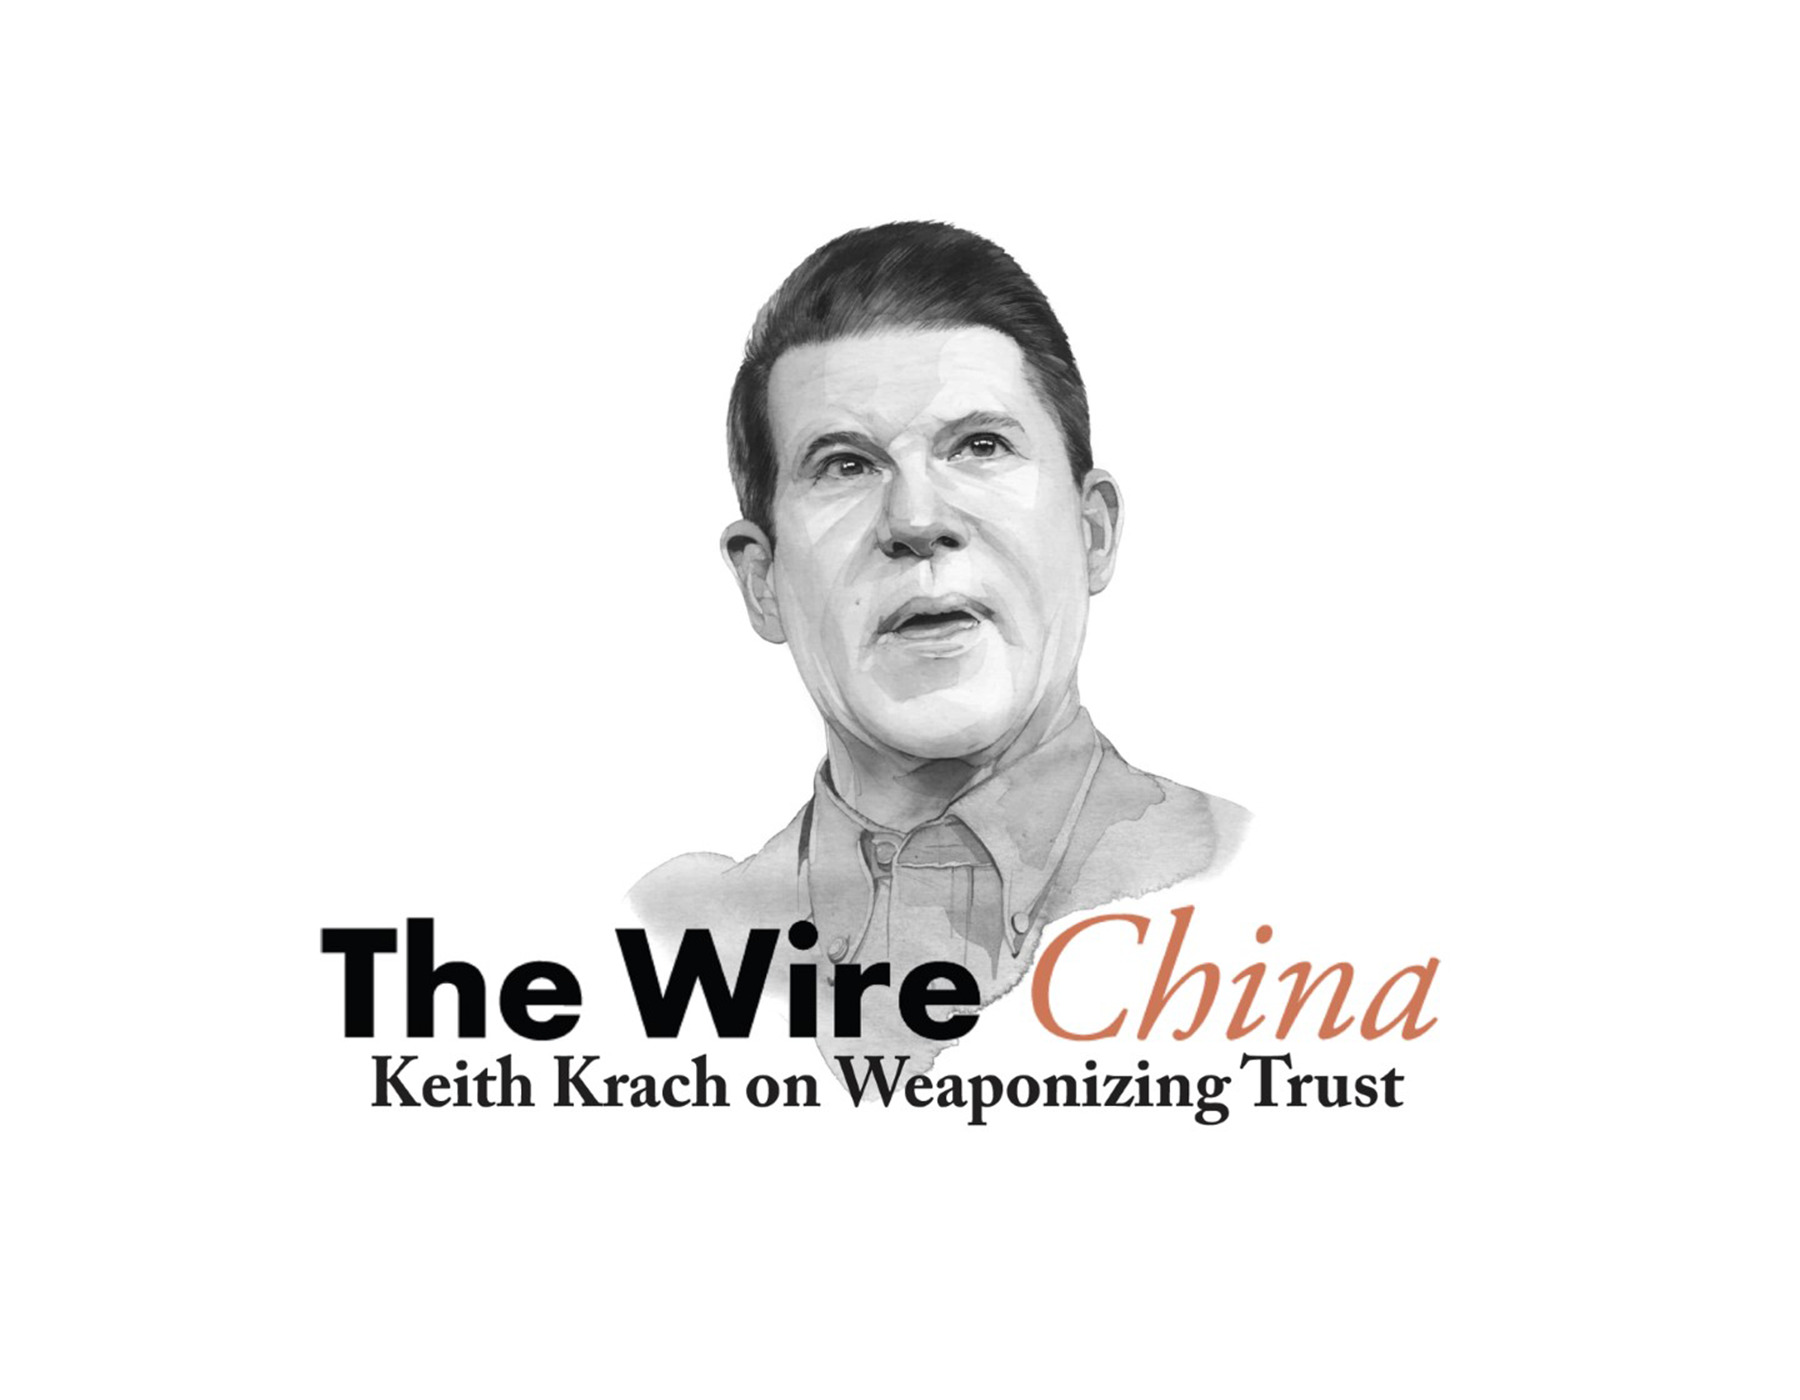 Keith Krach on Weaponizing Trust